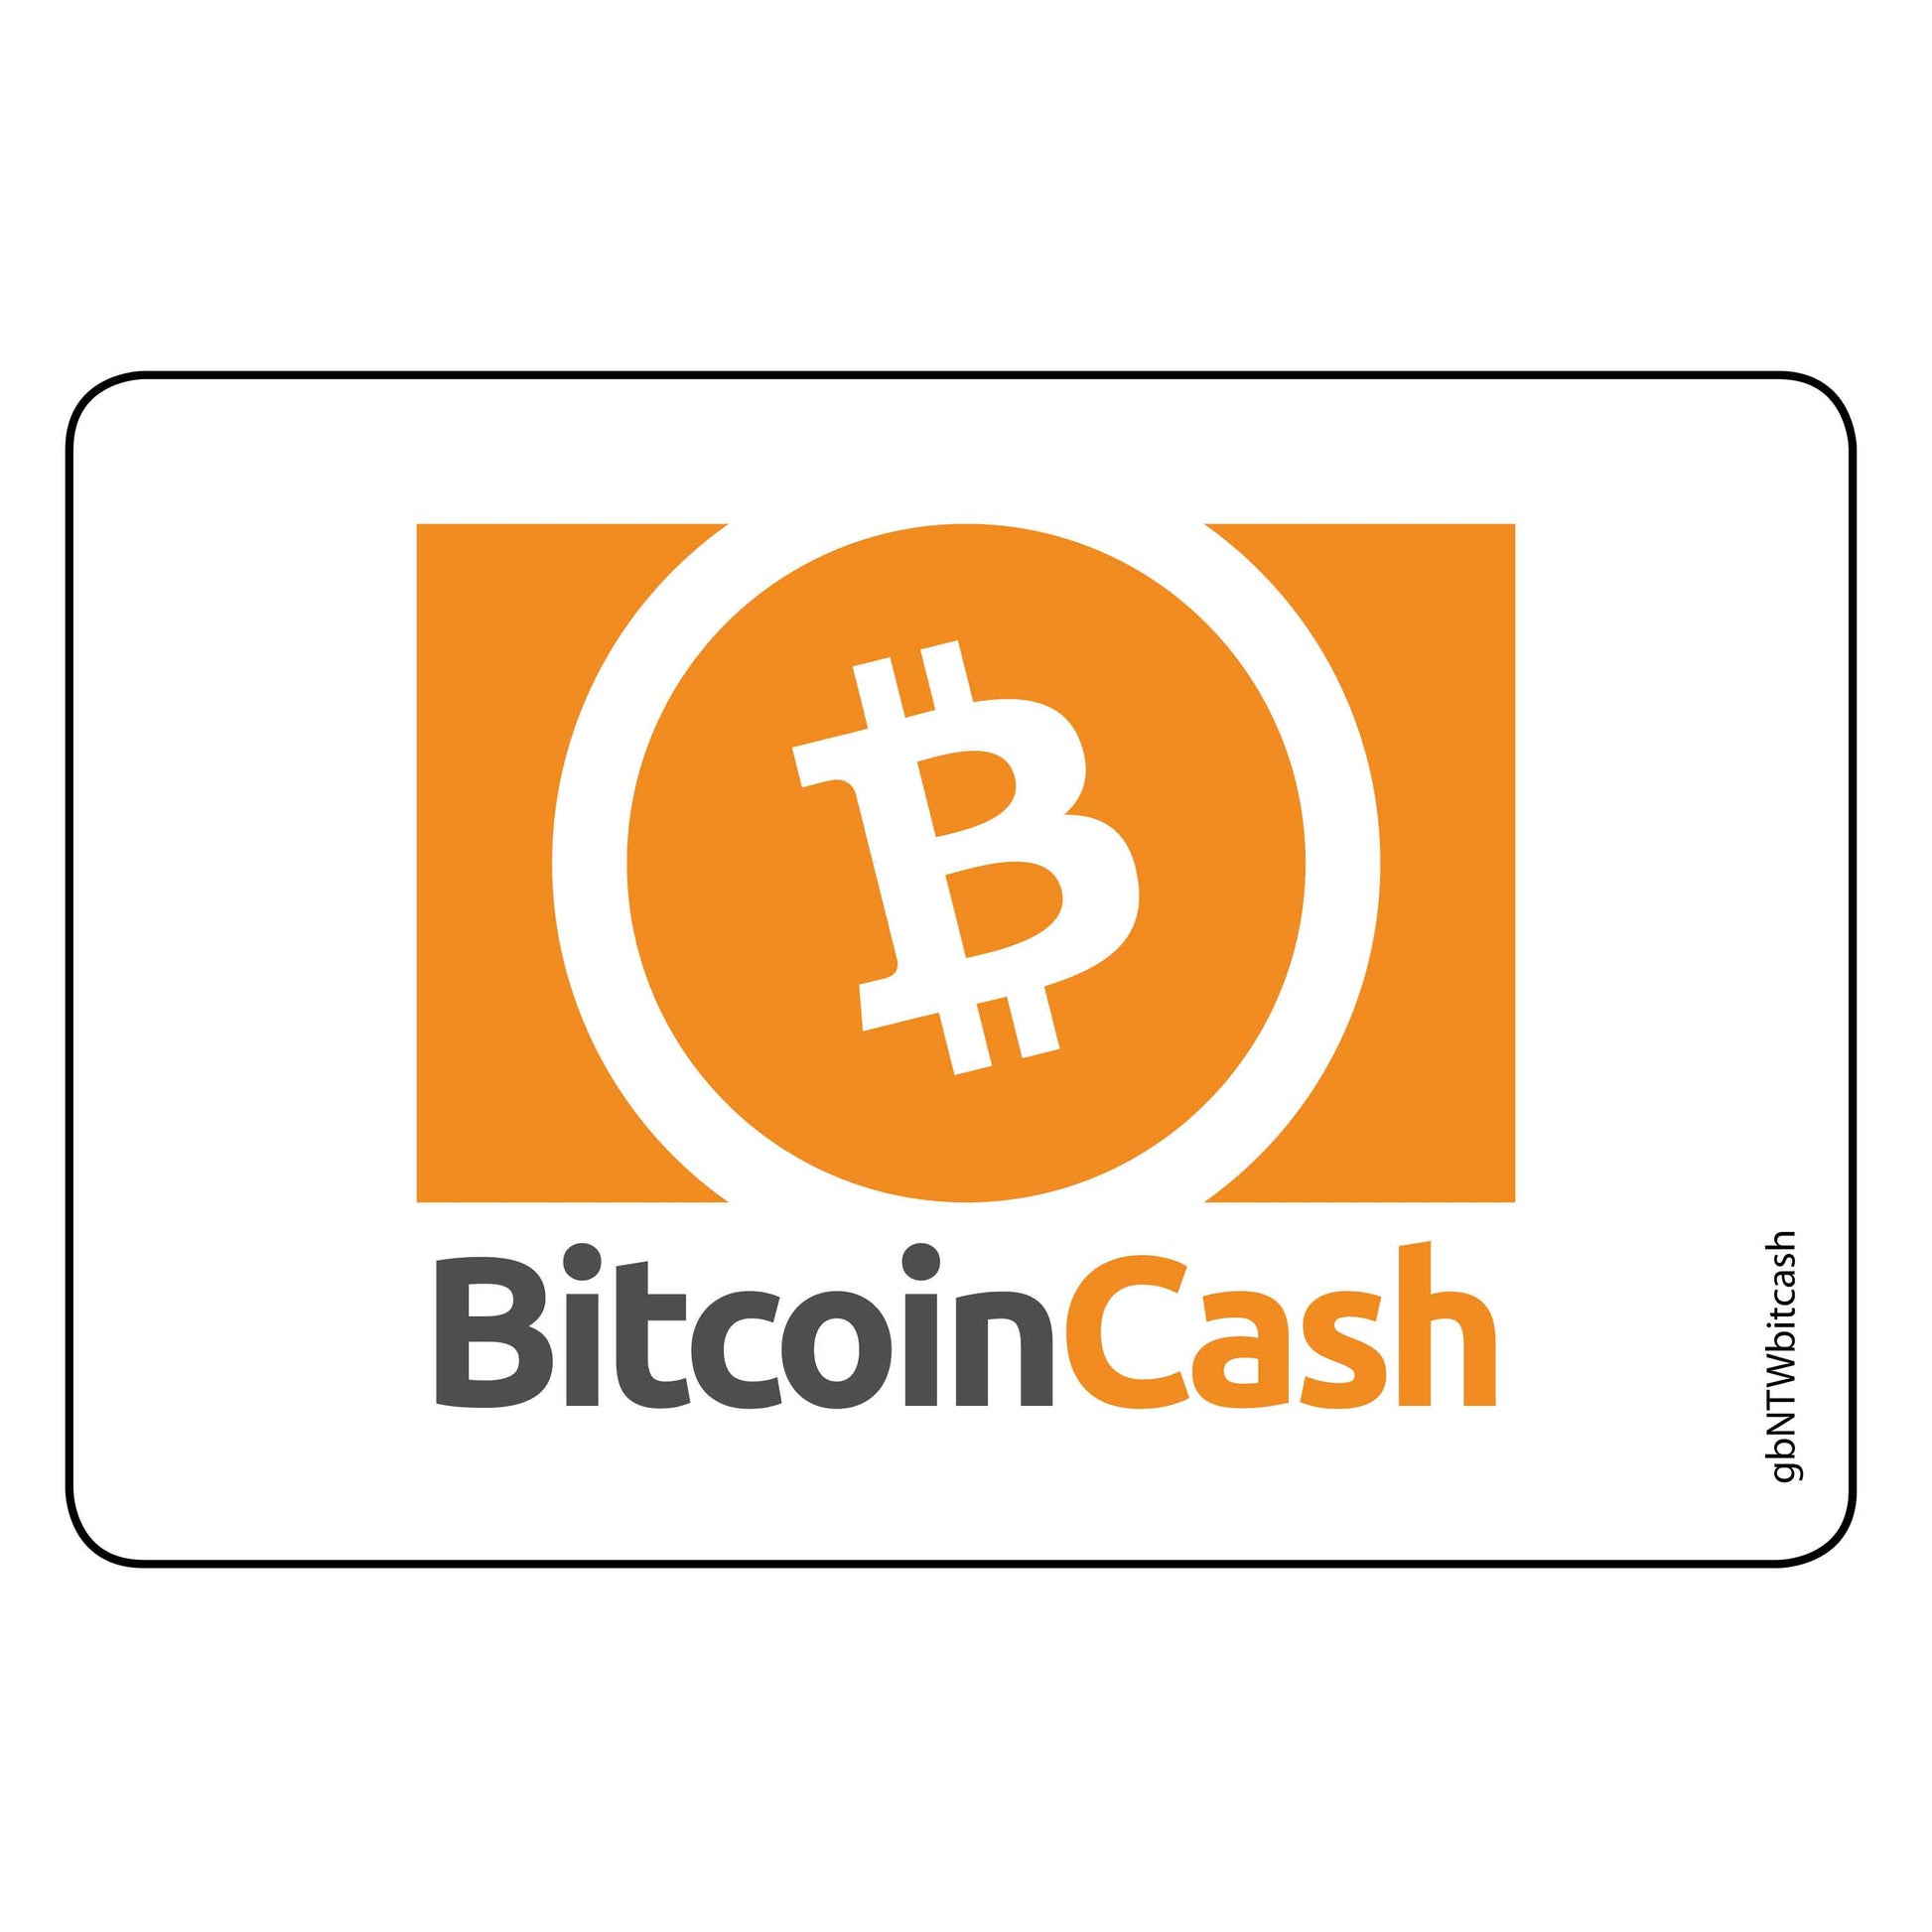 Single Network Decal, Bitcoin Cash Decal. 3 inches by 2 inches in size.